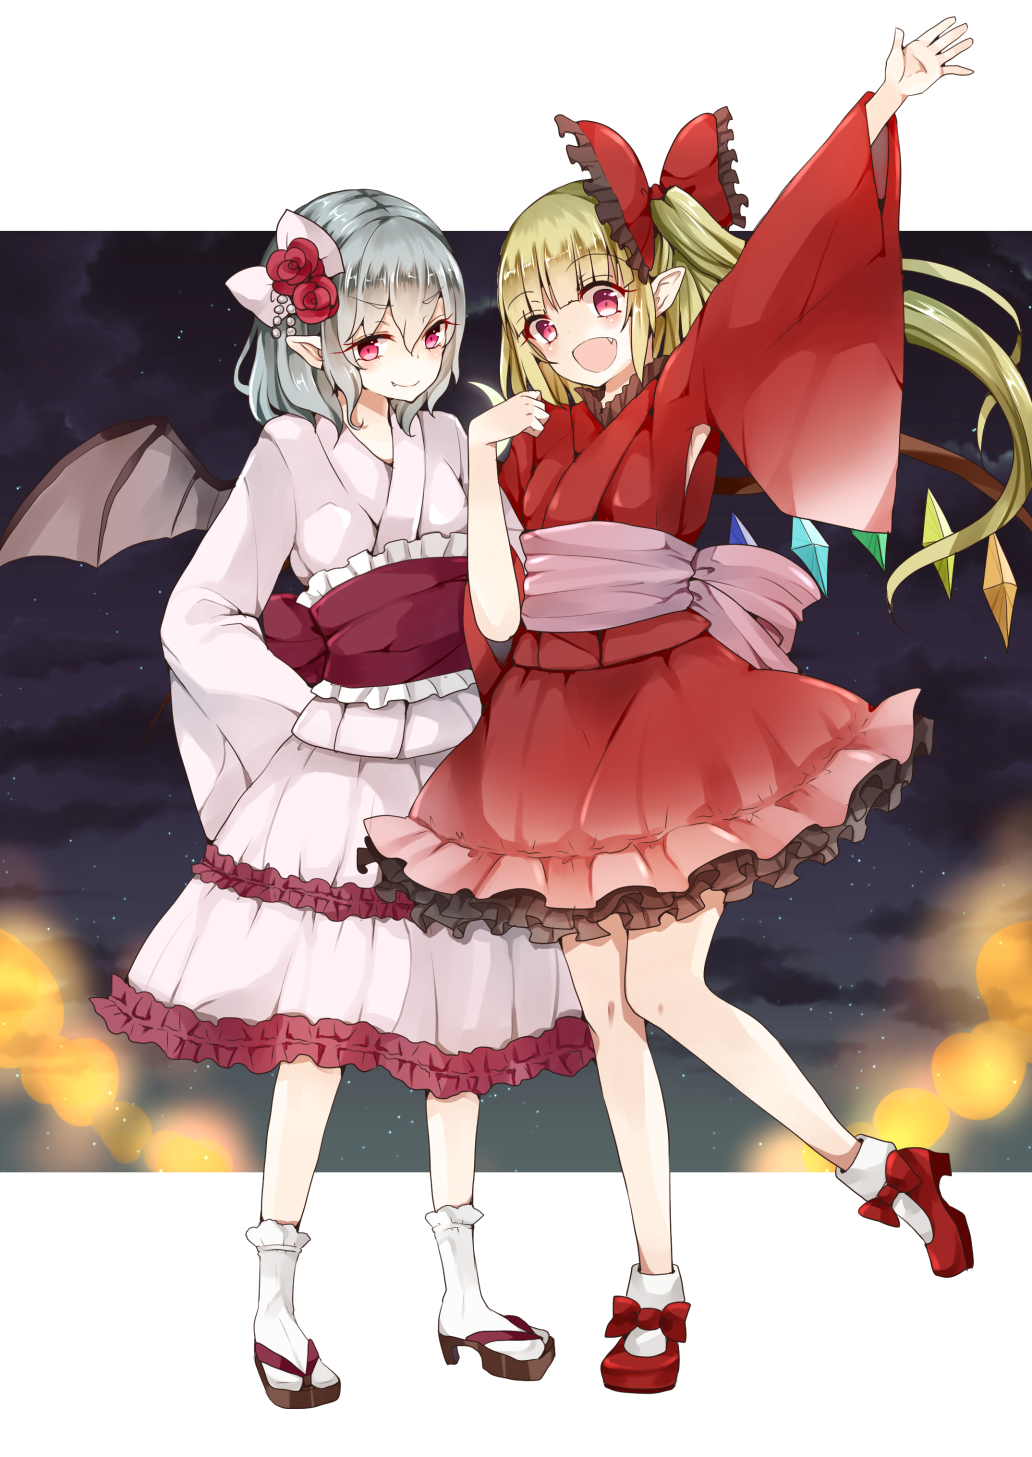 2girls alternate_costume bangs bat_wings blonde_hair blunt_bangs bow closed_mouth commentary_request fang fang_out flandre_scarlet flower hair_bow hair_flower hair_ornament high_heels highres japanese_clothes kimono long_hair long_sleeves looking_at_viewer mimoto_(aszxdfcv) multiple_girls open_mouth pink_kimono pointy_ears red_bow red_eyes red_kimono red_rose red_shoes remilia_scarlet rose sandals sash shoes silver_hair smile socks standing standing_on_one_leg touhou white_legwear wide_sleeves wings yukata